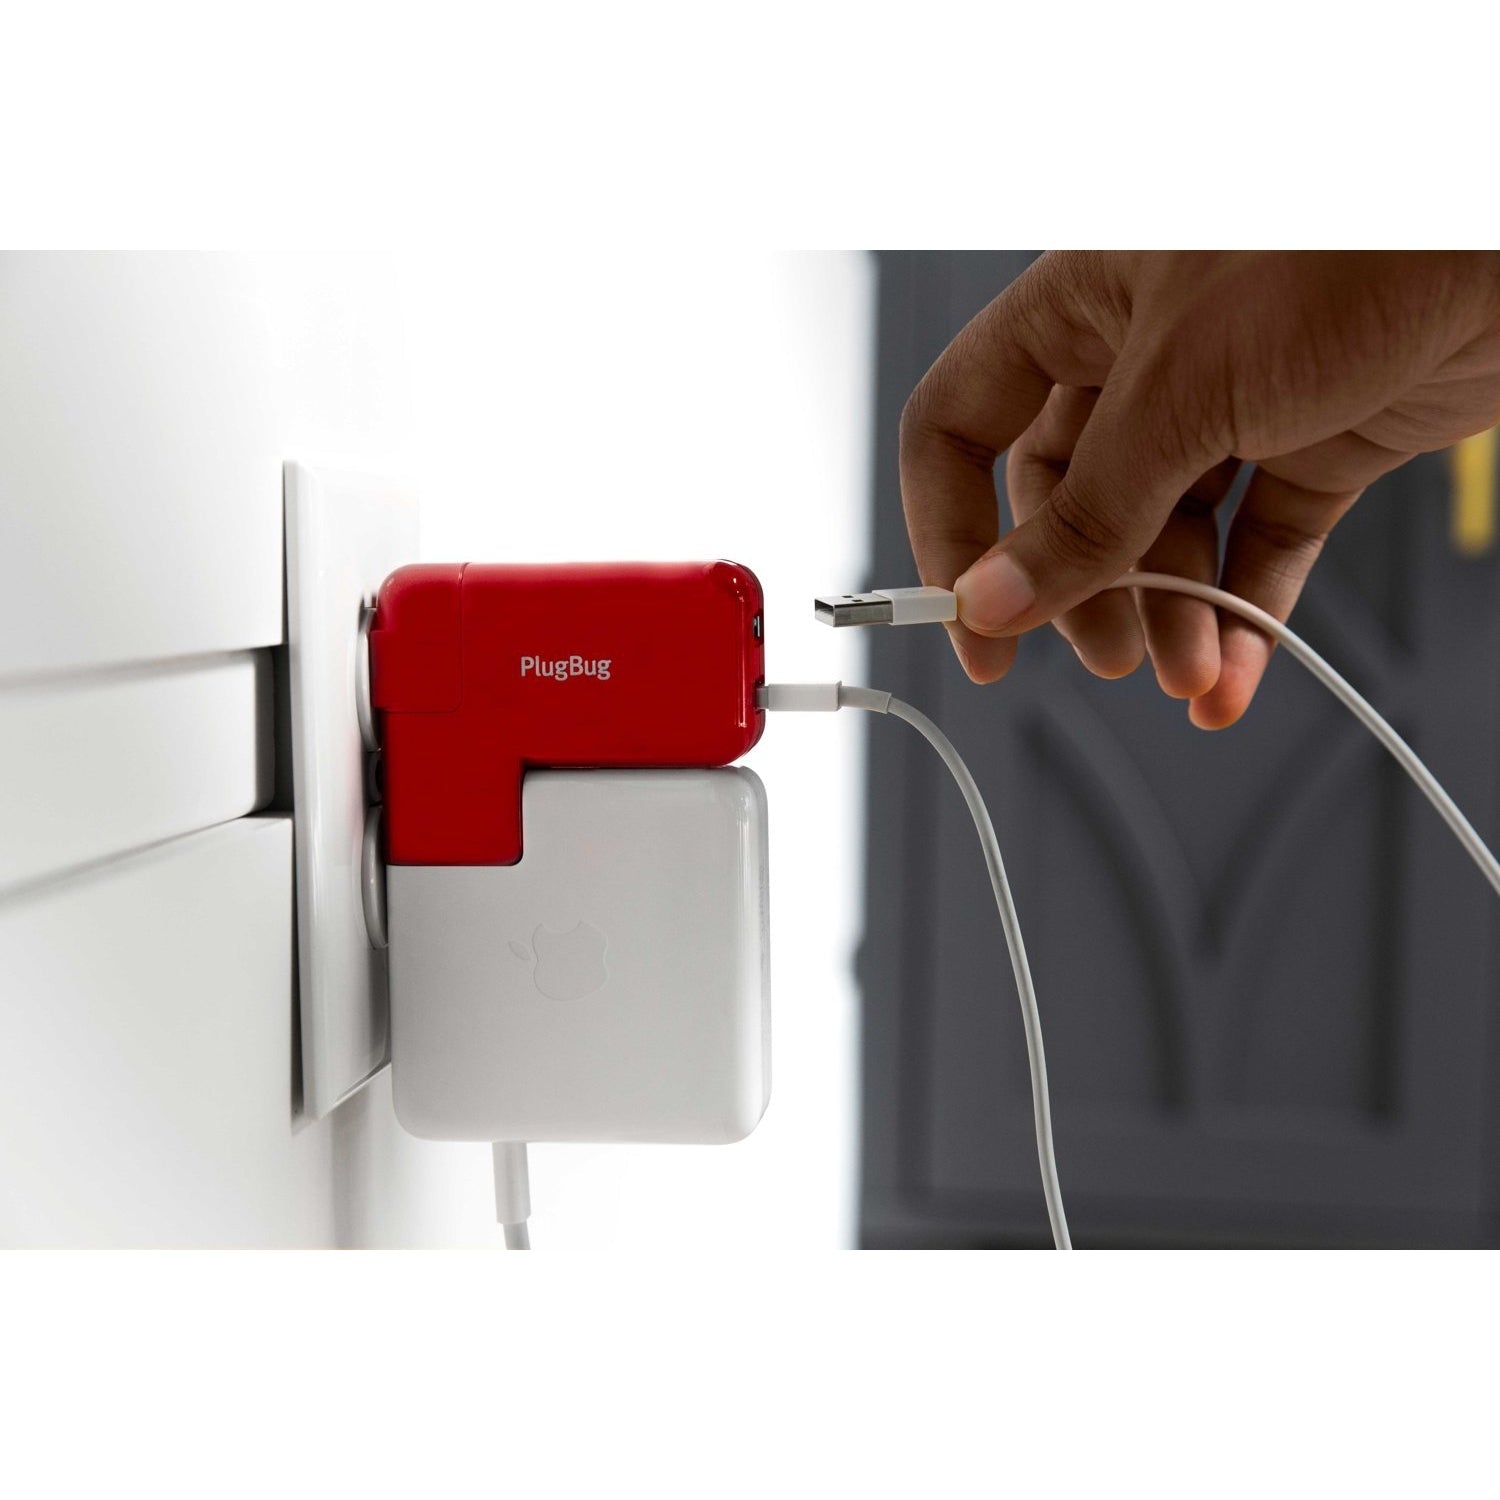 BEON.COM.AU Supercharge your MacBook charger. Congrats - you’ve got the newest MacBook with USB-C. Uh-oh, it doesn’t charge most of your other gear - your iPhone, iPad, wireless headphones, battery pack, Magic Mouse, etc. PlugBug Duo to the rescue! Snap PlugBug Duo onto your Apple MacBook power adapter and a... Twelve South at BEON.COM.AU